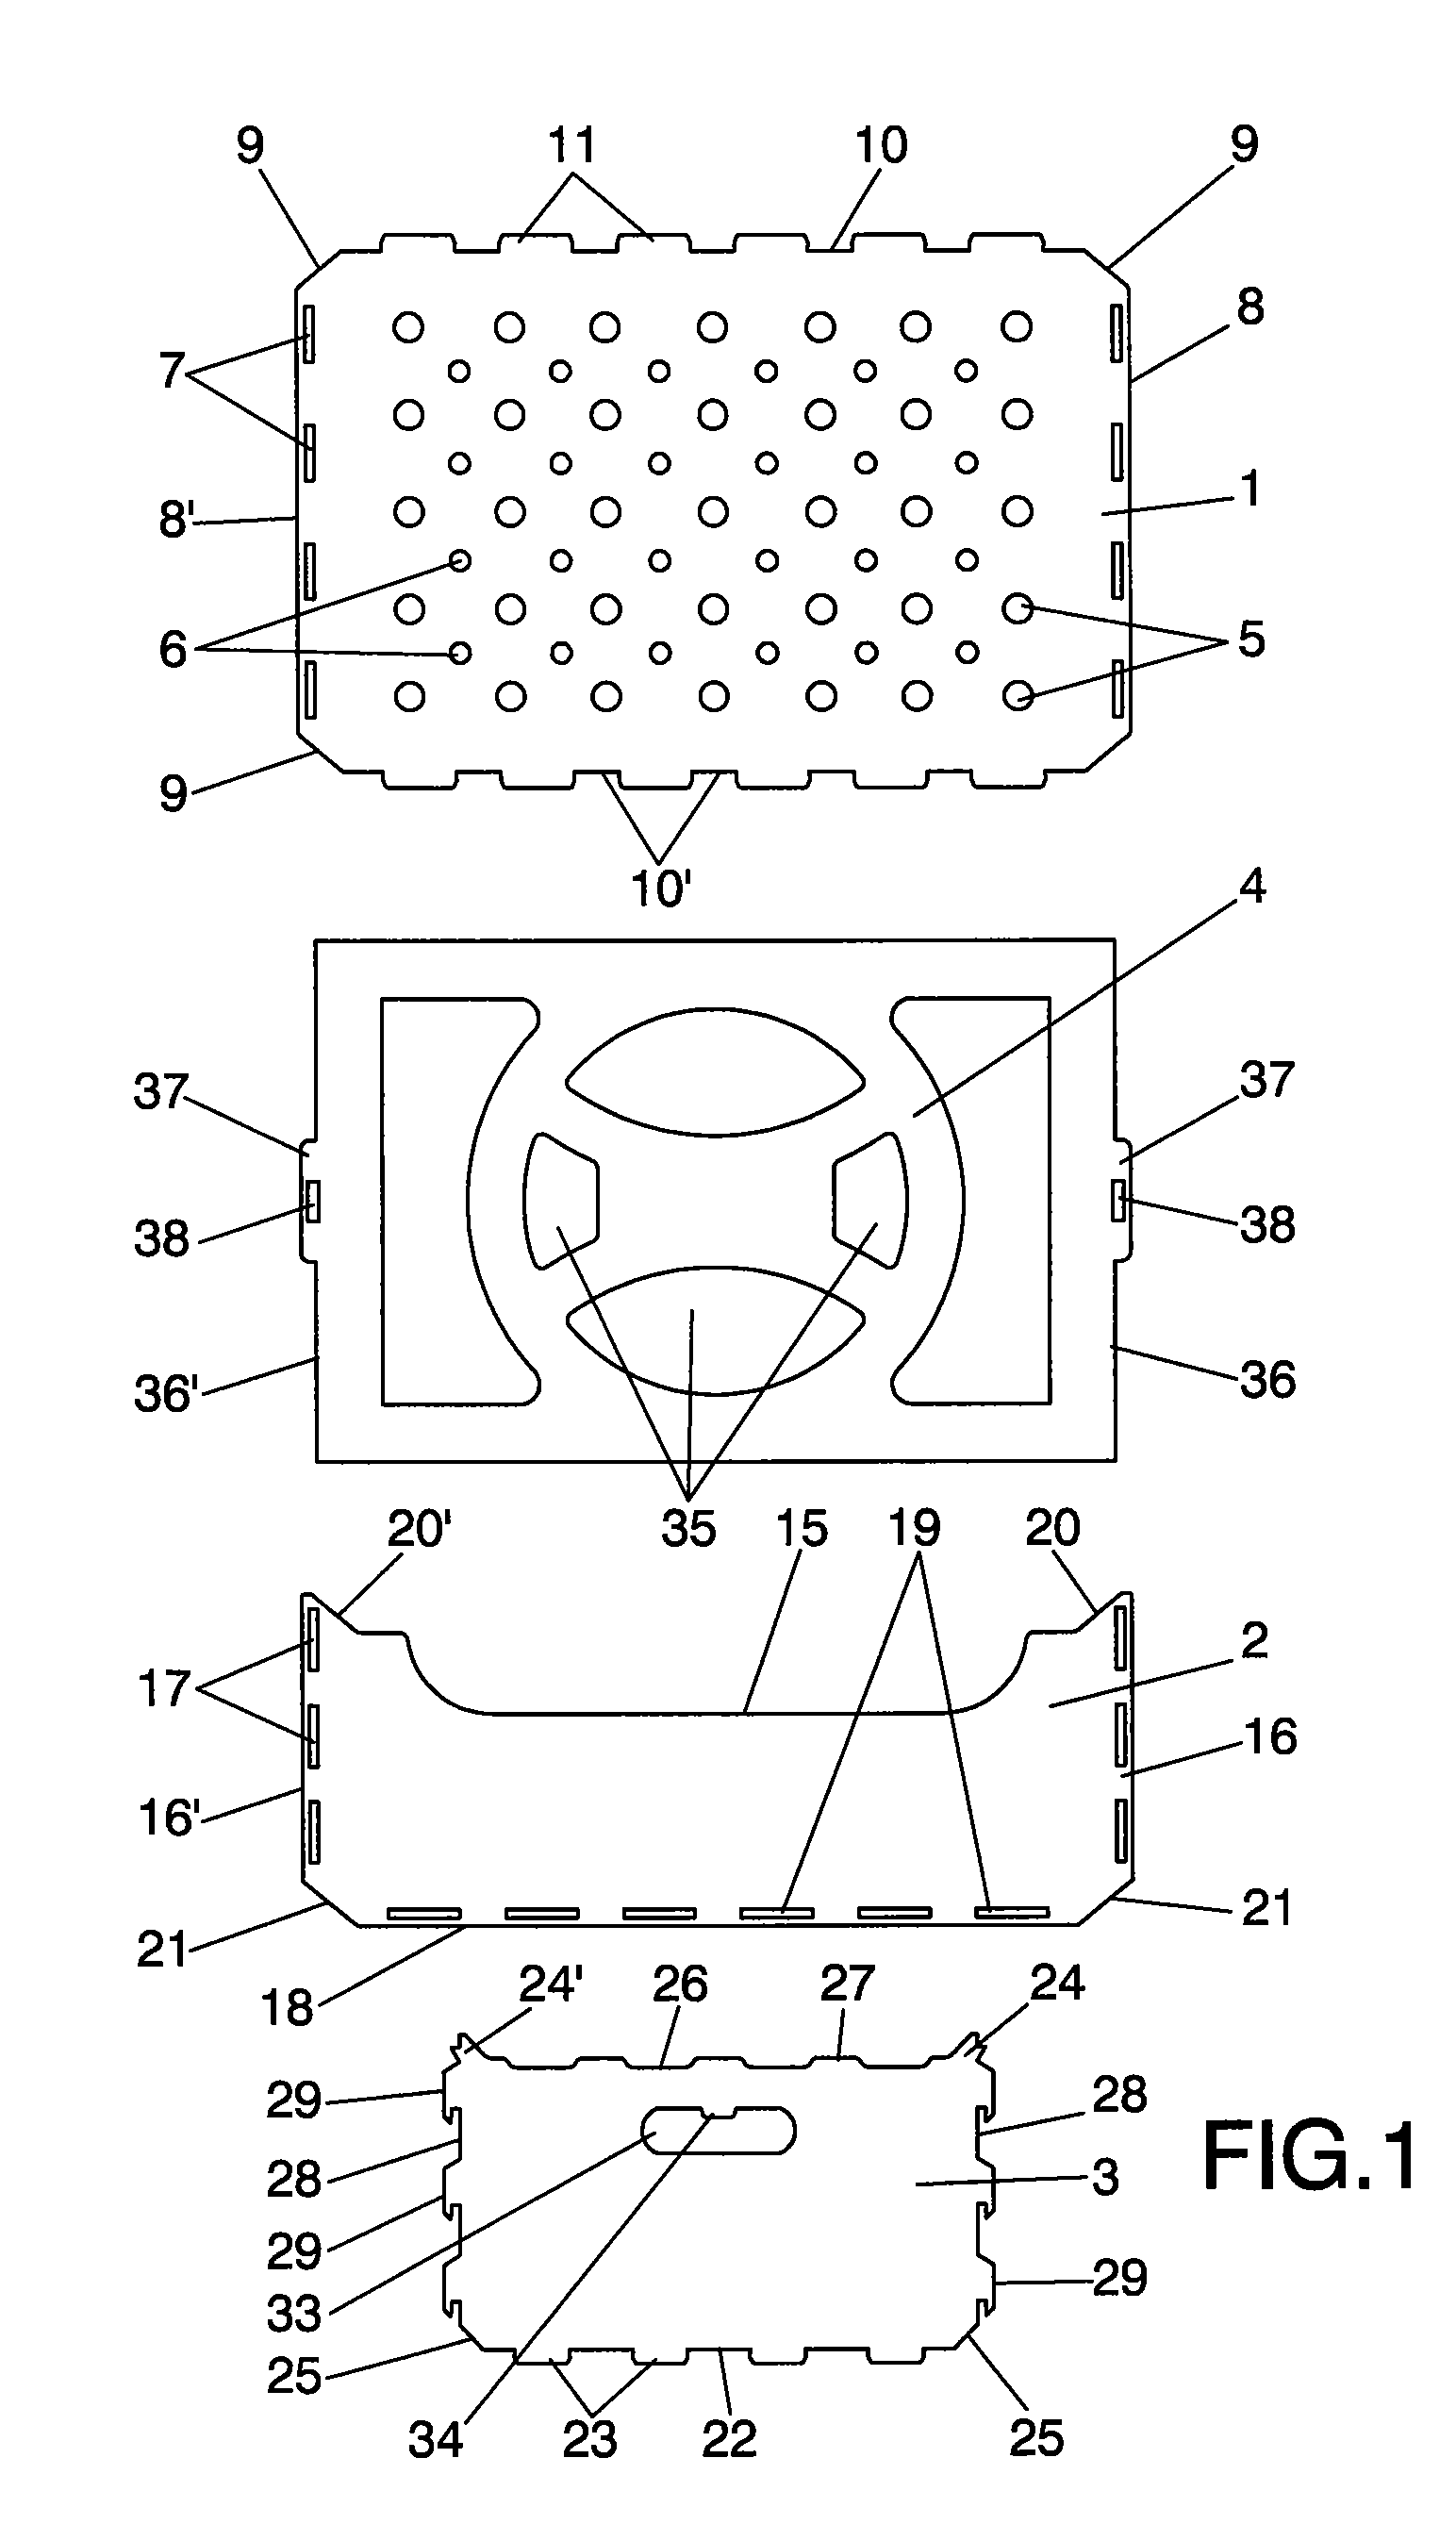 Single-material package for containing fruit and vegetable produce with lid